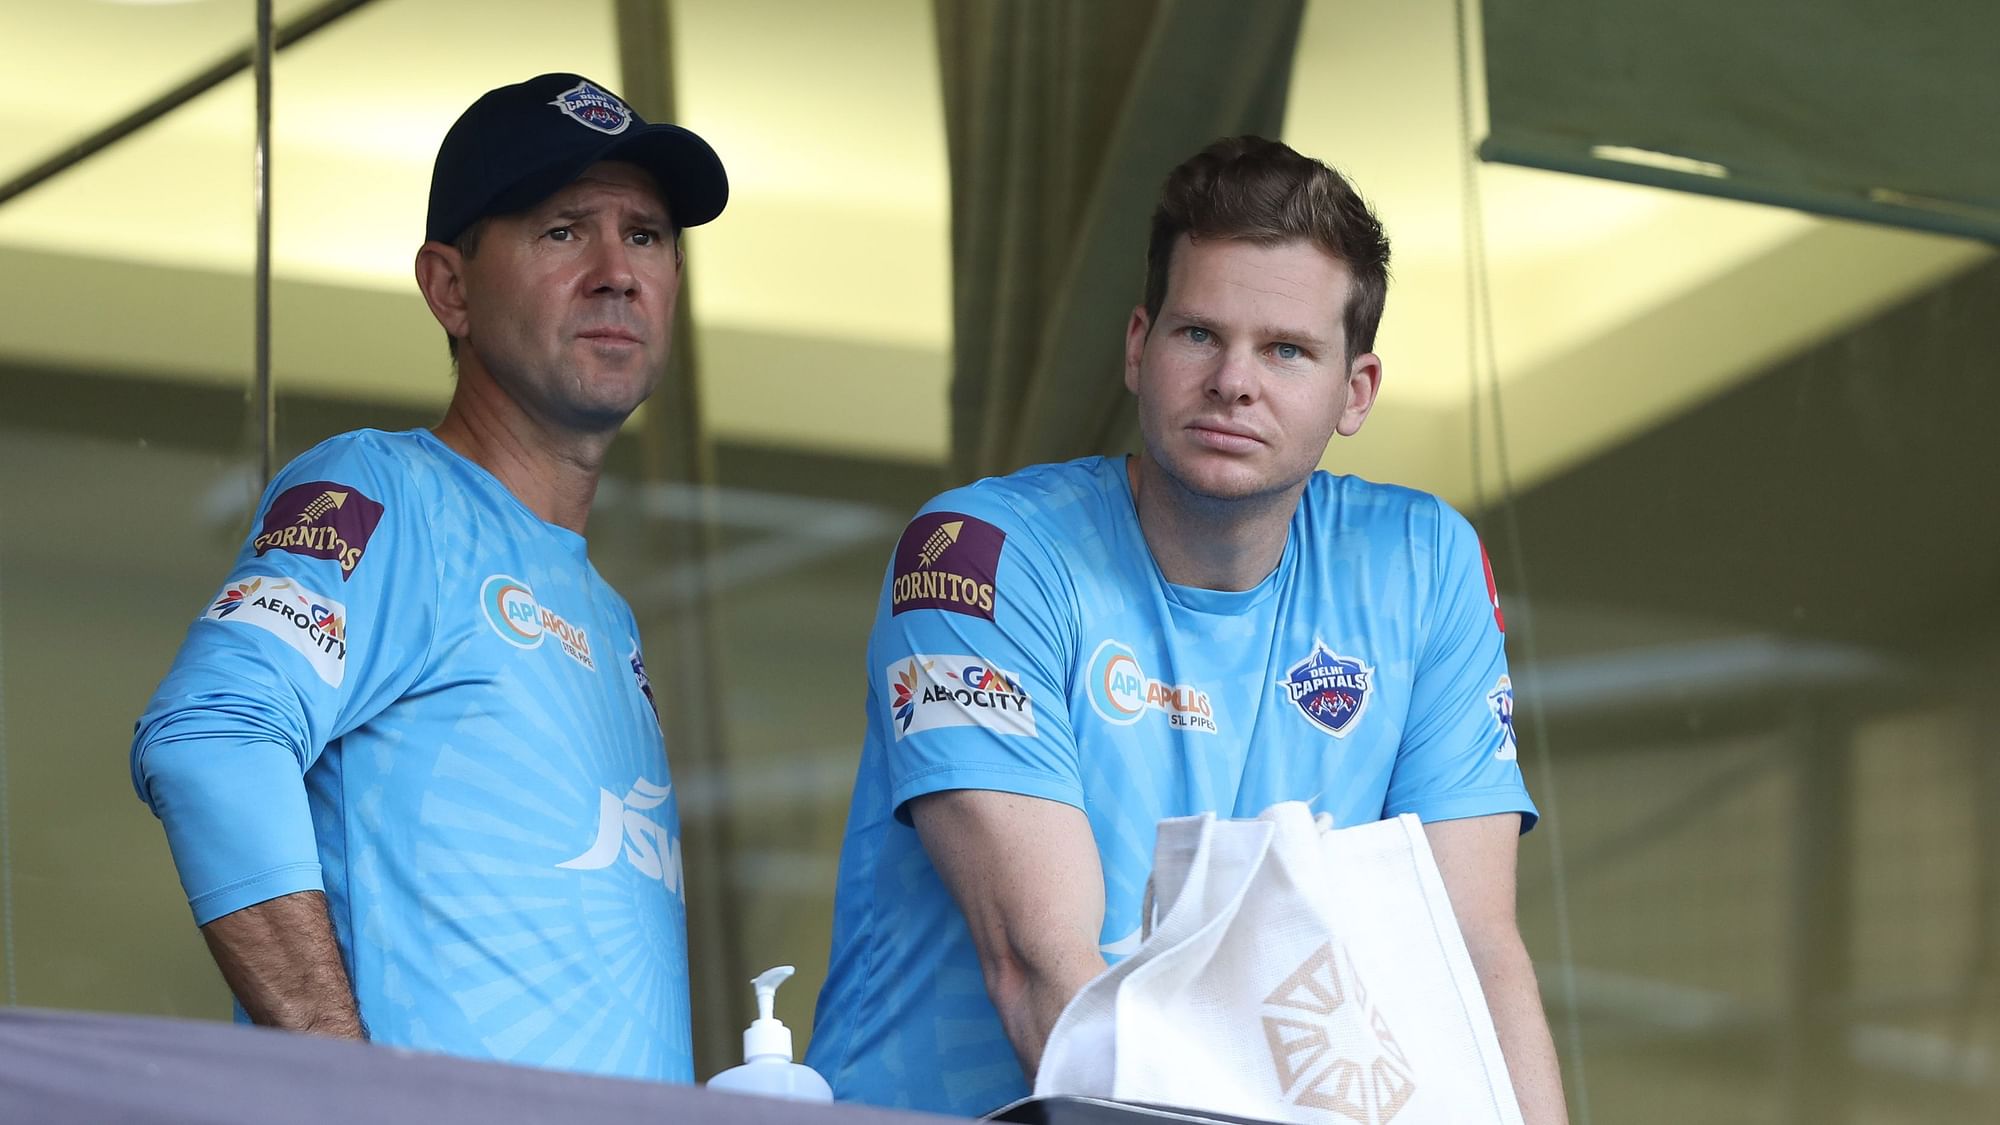 Delhi Capitals’ Steve Smith and Ricky Ponting in the dressing room balcony during IPL 2021.&nbsp;